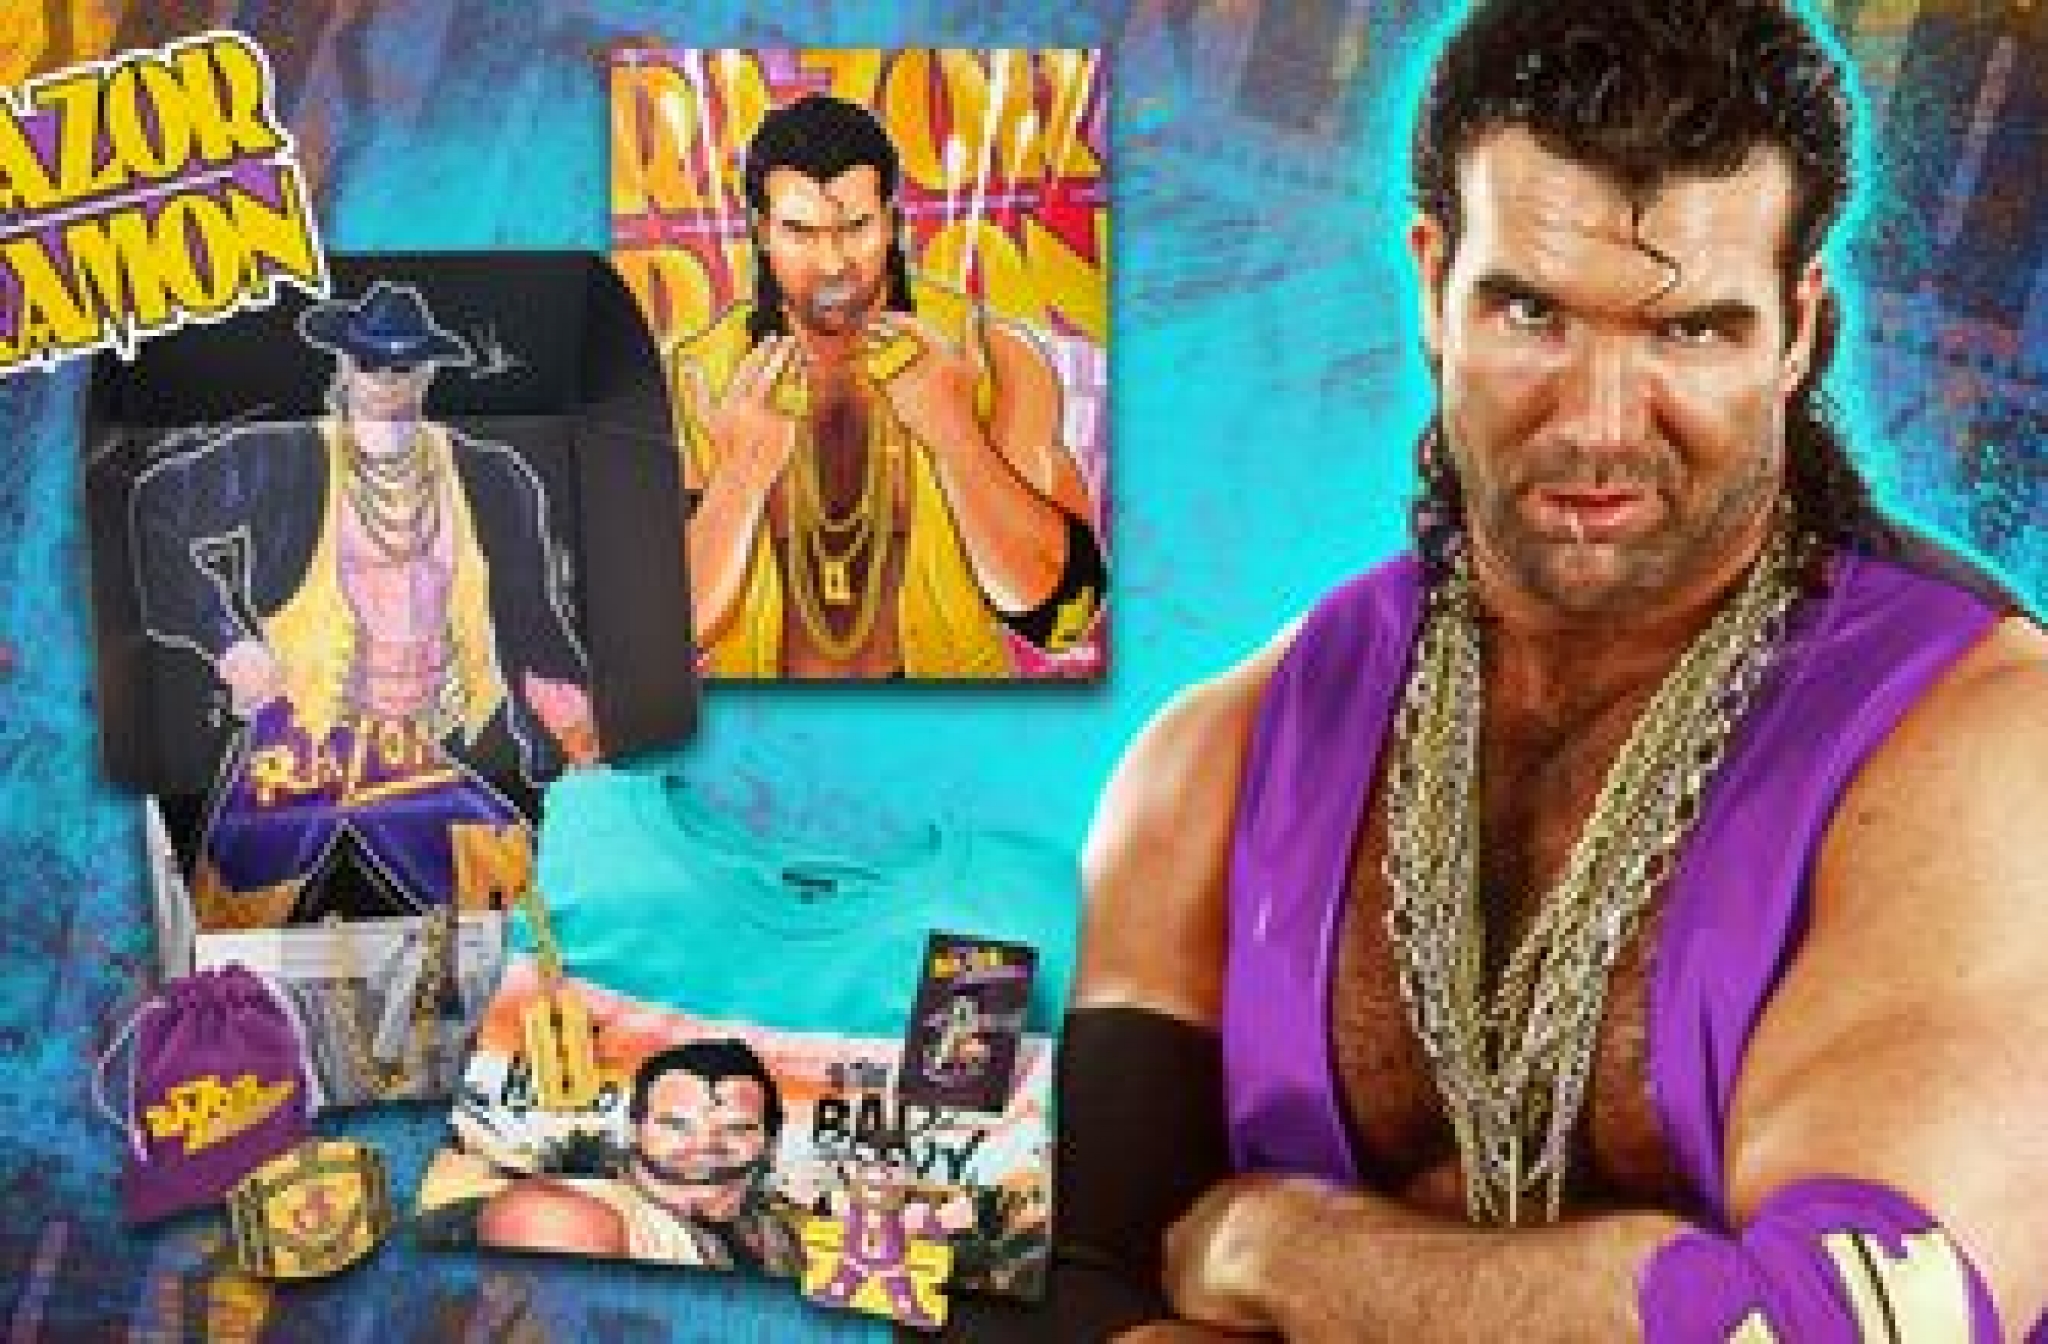 Razor Ramon Limited Edition Collector’s Box available on WWE Shop